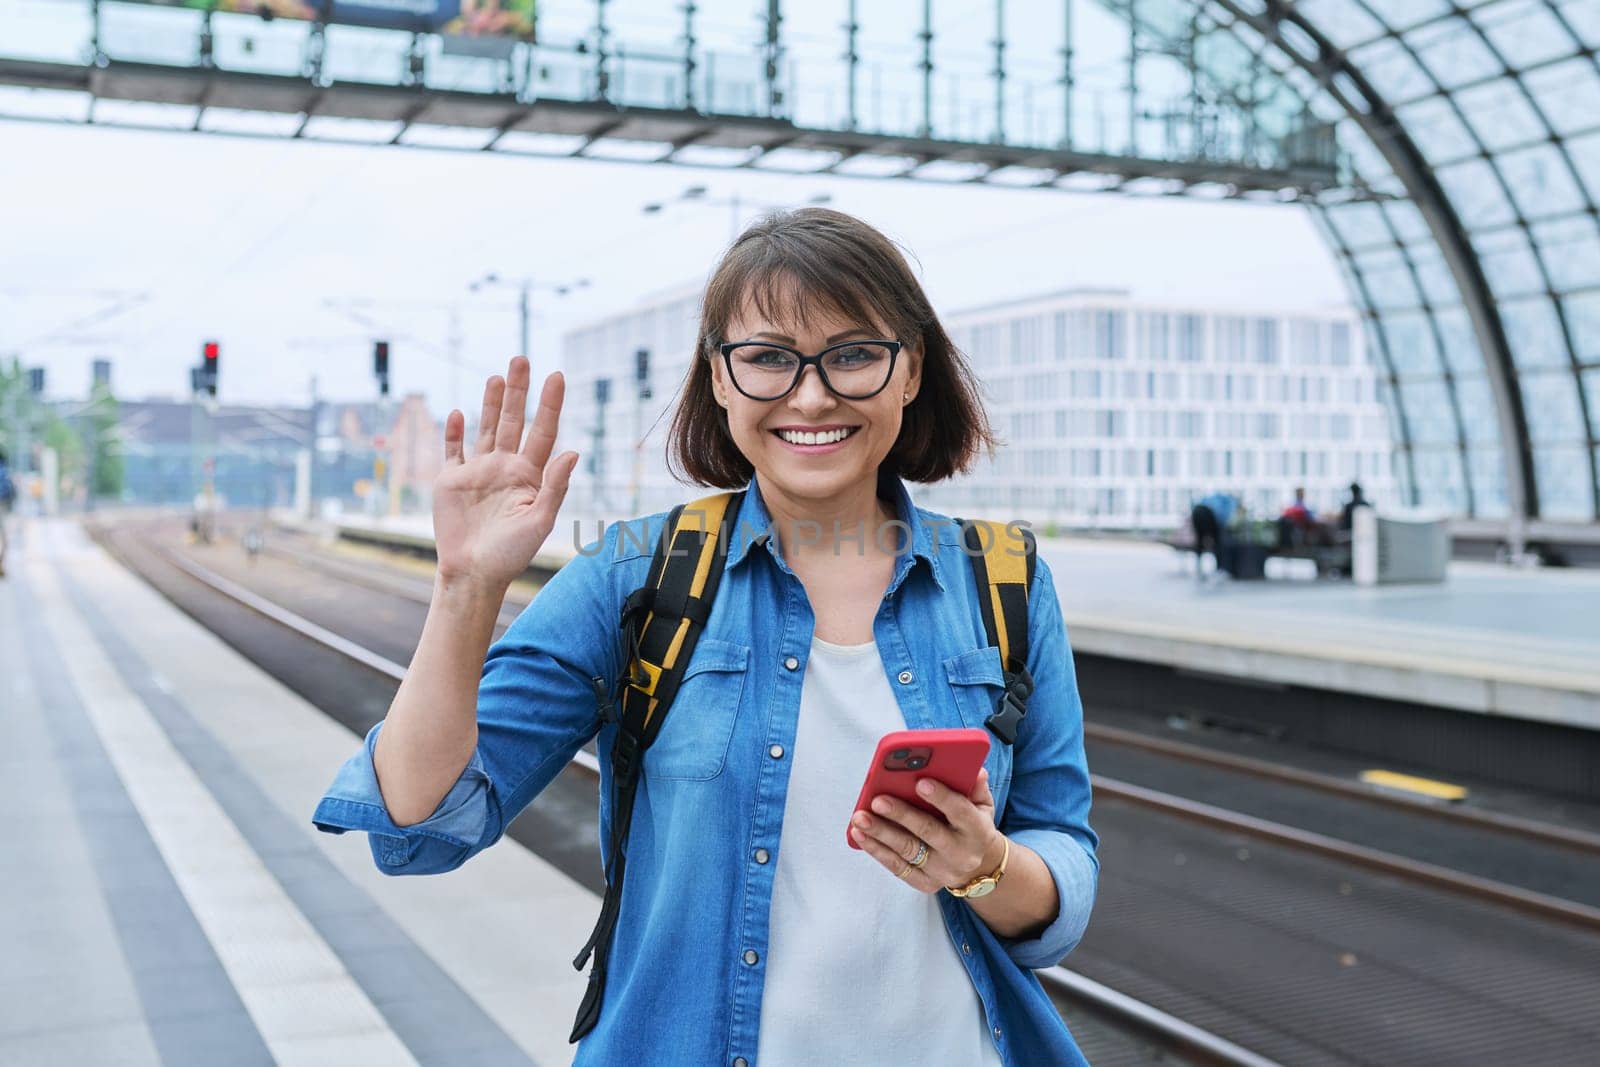 Mature happy woman with smartphone backpack looking at camera inside modern train station building, on platform. Emotion joy happiness, transportation, journey, trip, middle age people concept